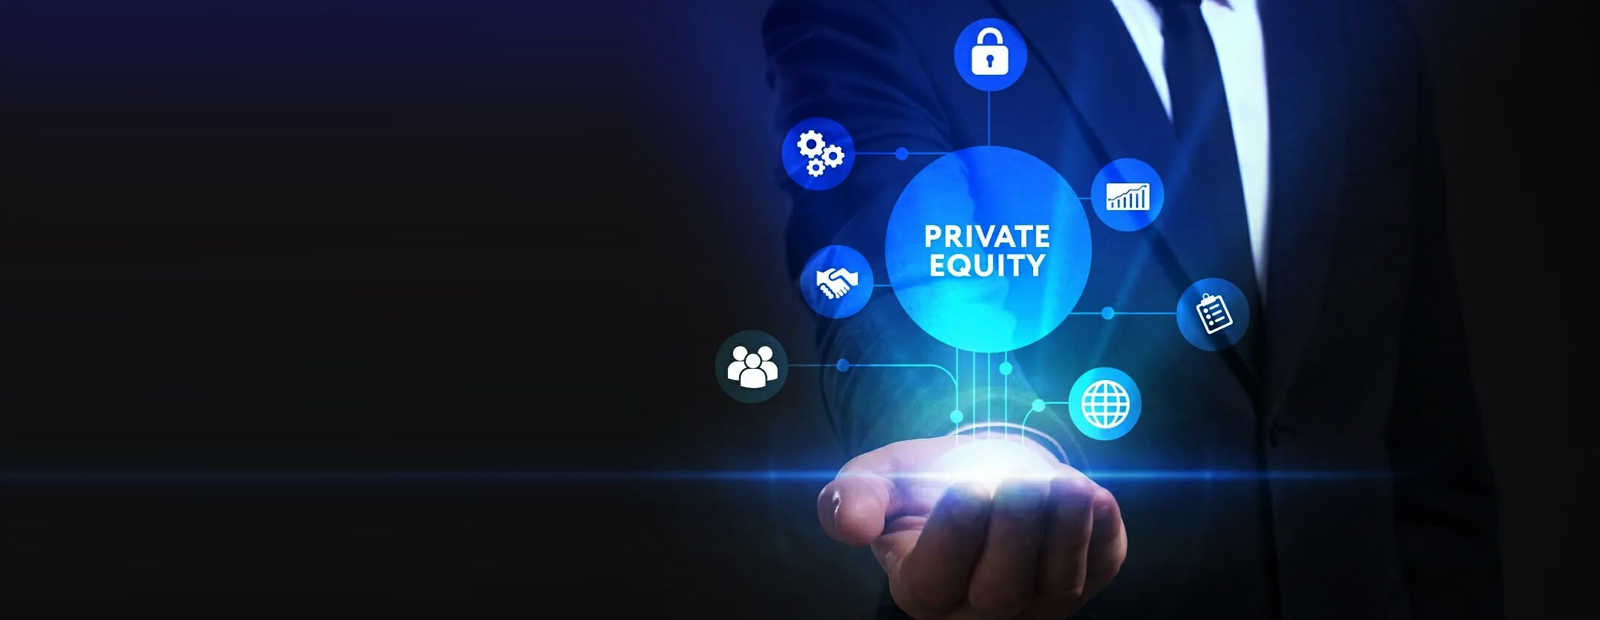 How to Get into Private Equity